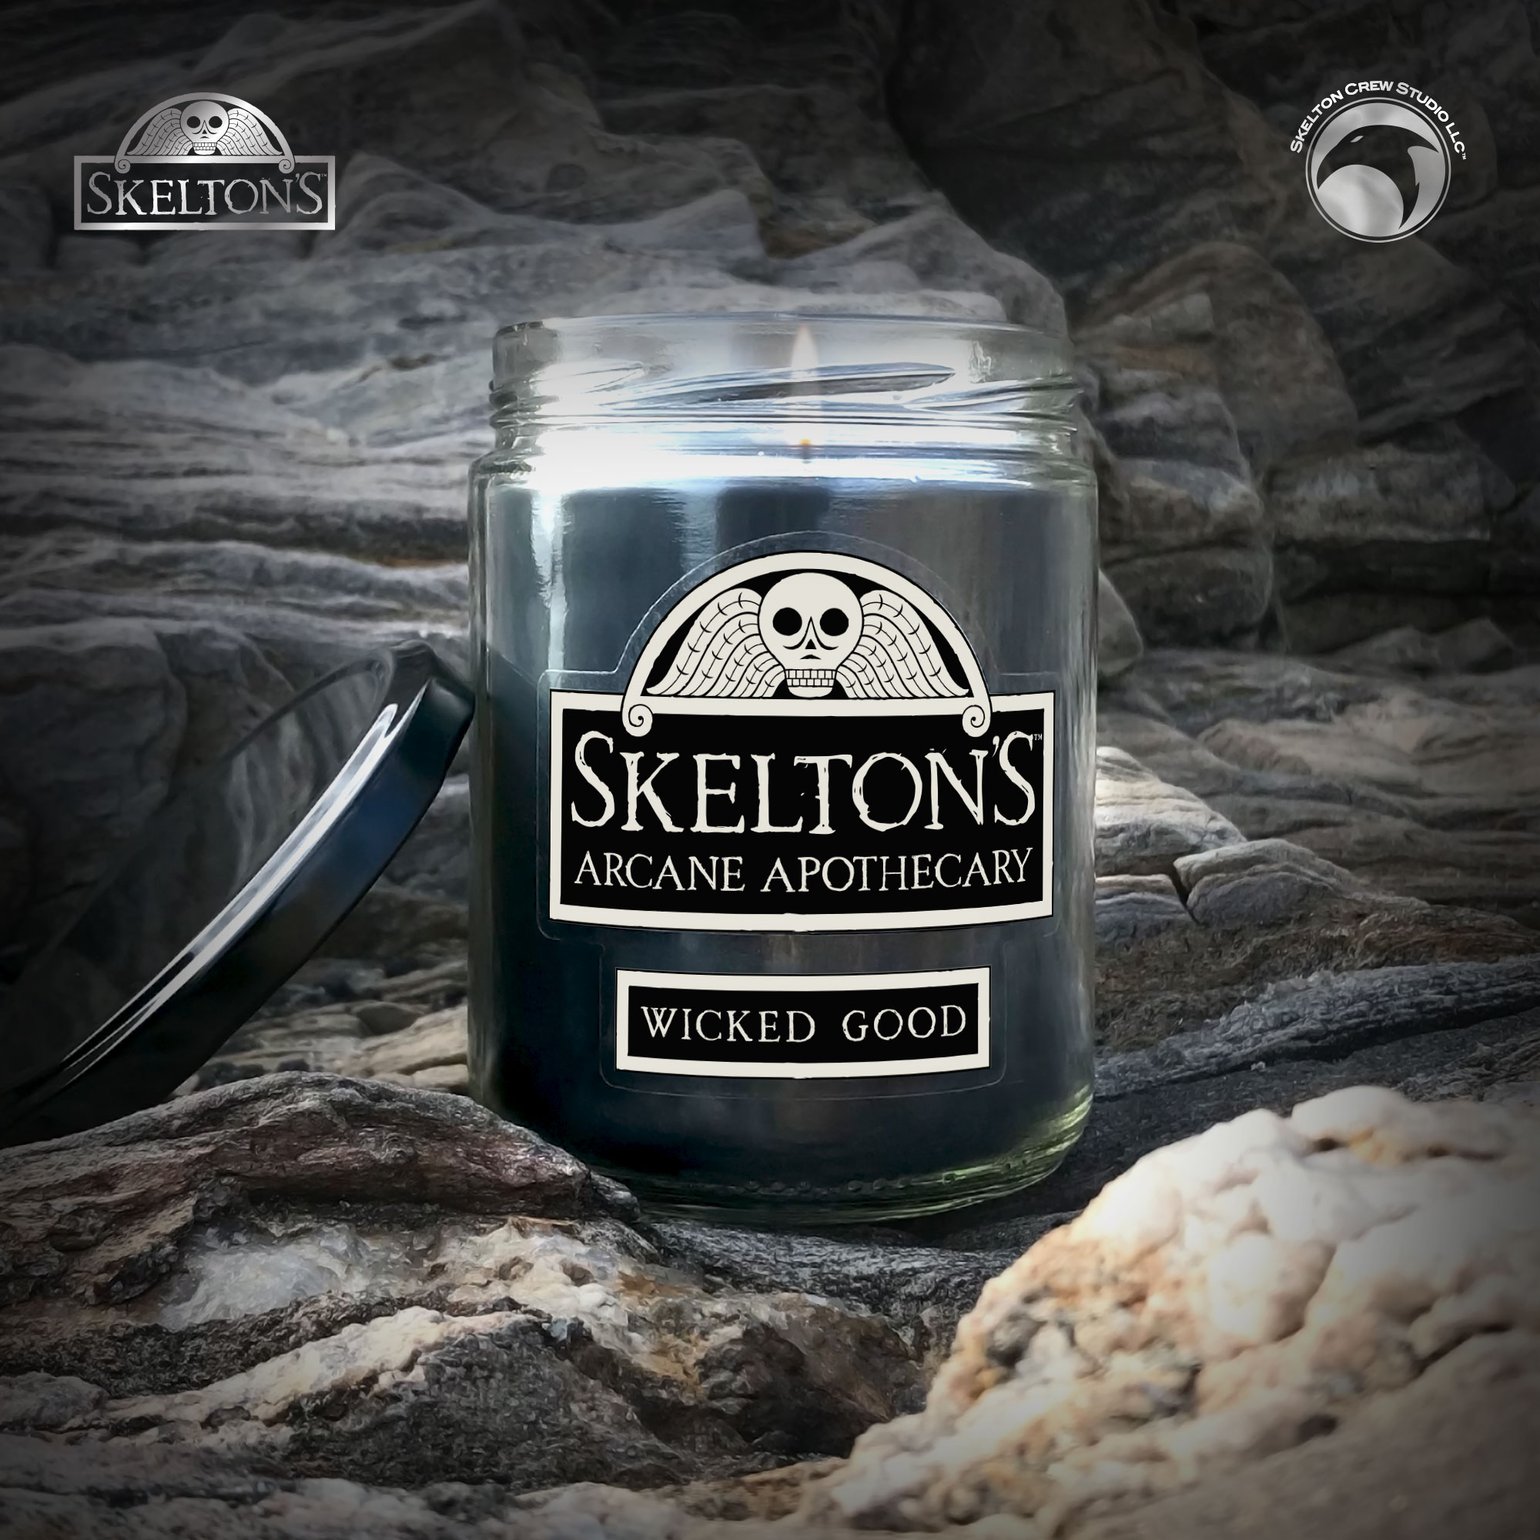 Image of Skelton's Arcane Apothecary: Wicked Good candle! FREE U.S. SHIPPING!